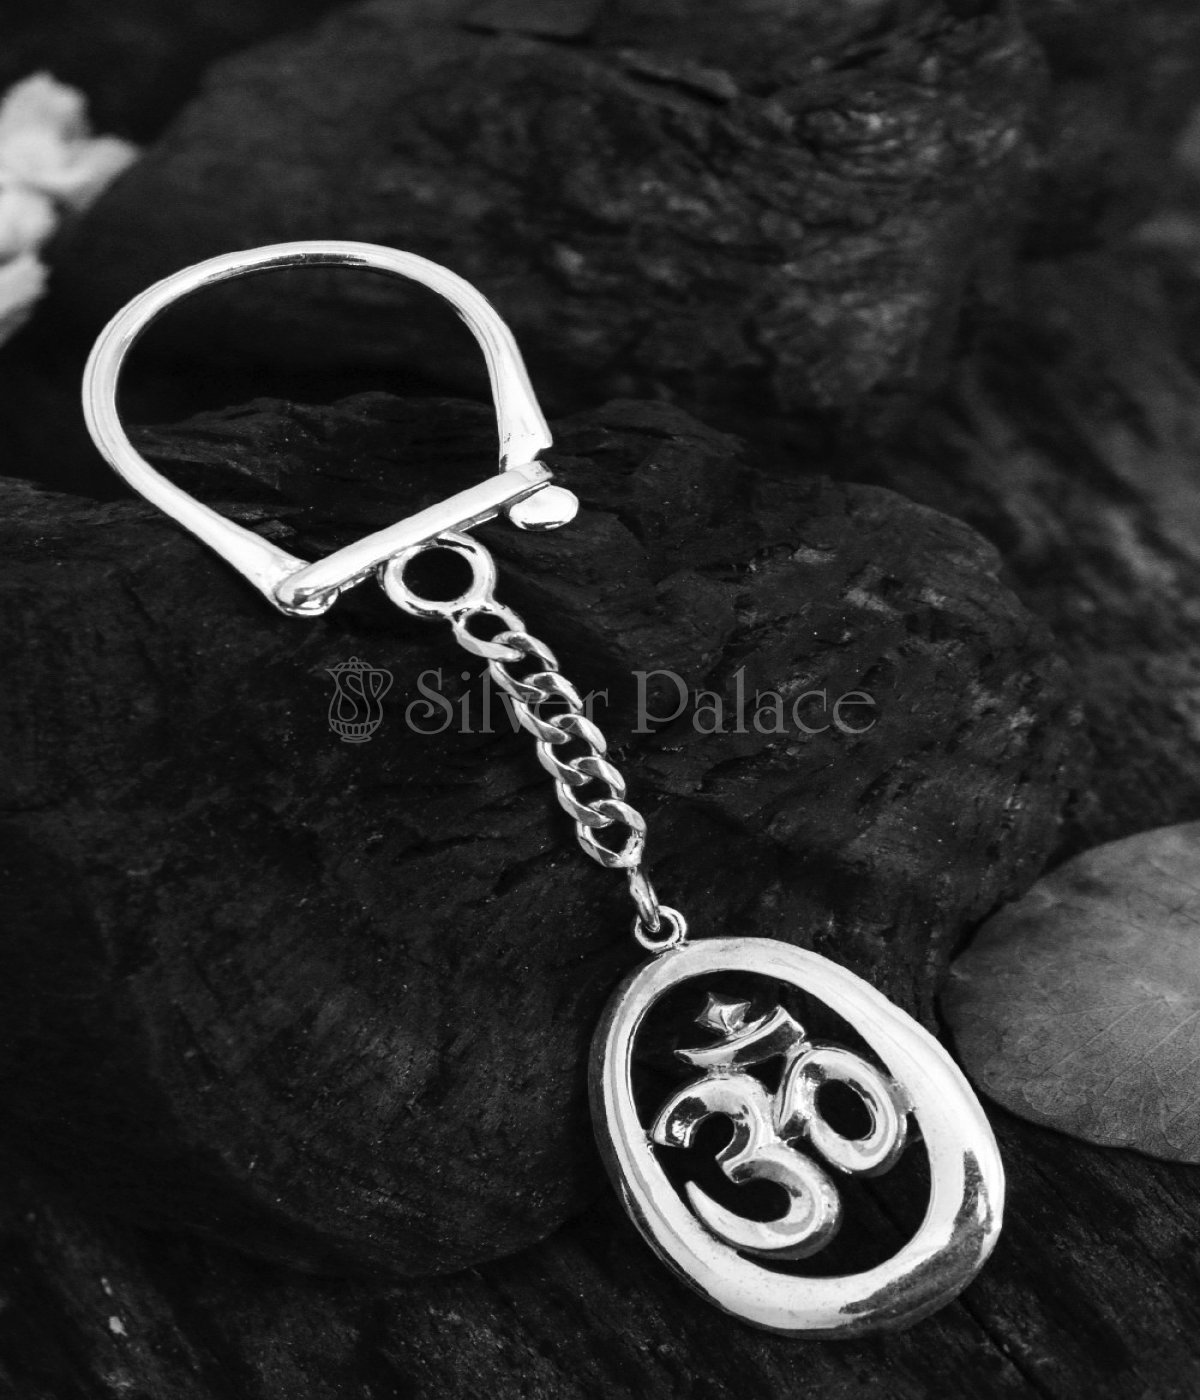 Silver Om Design Keychain Oval Shaped For Men - Silver Palace